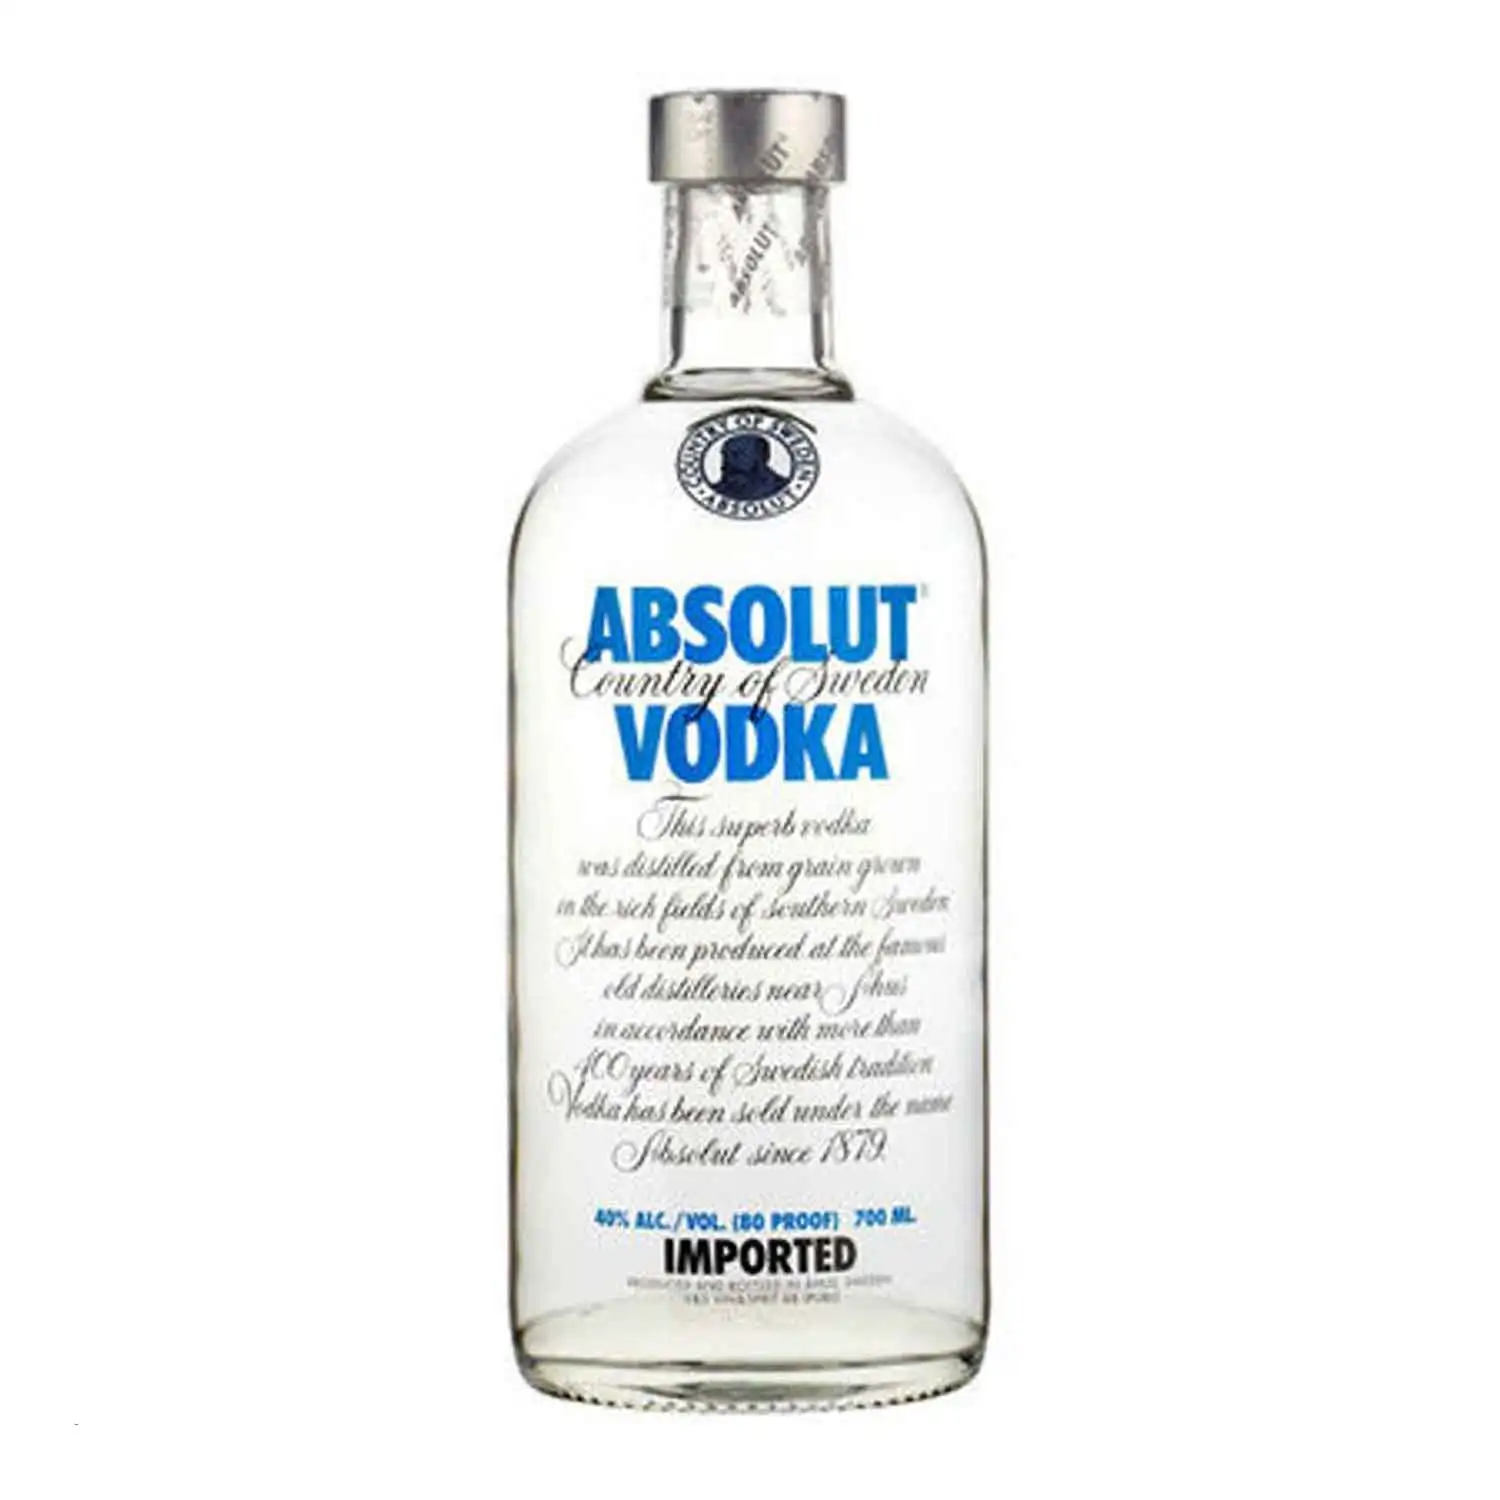 Absolut vodka 70cl Alc 40% - Buy at Real Tobacco